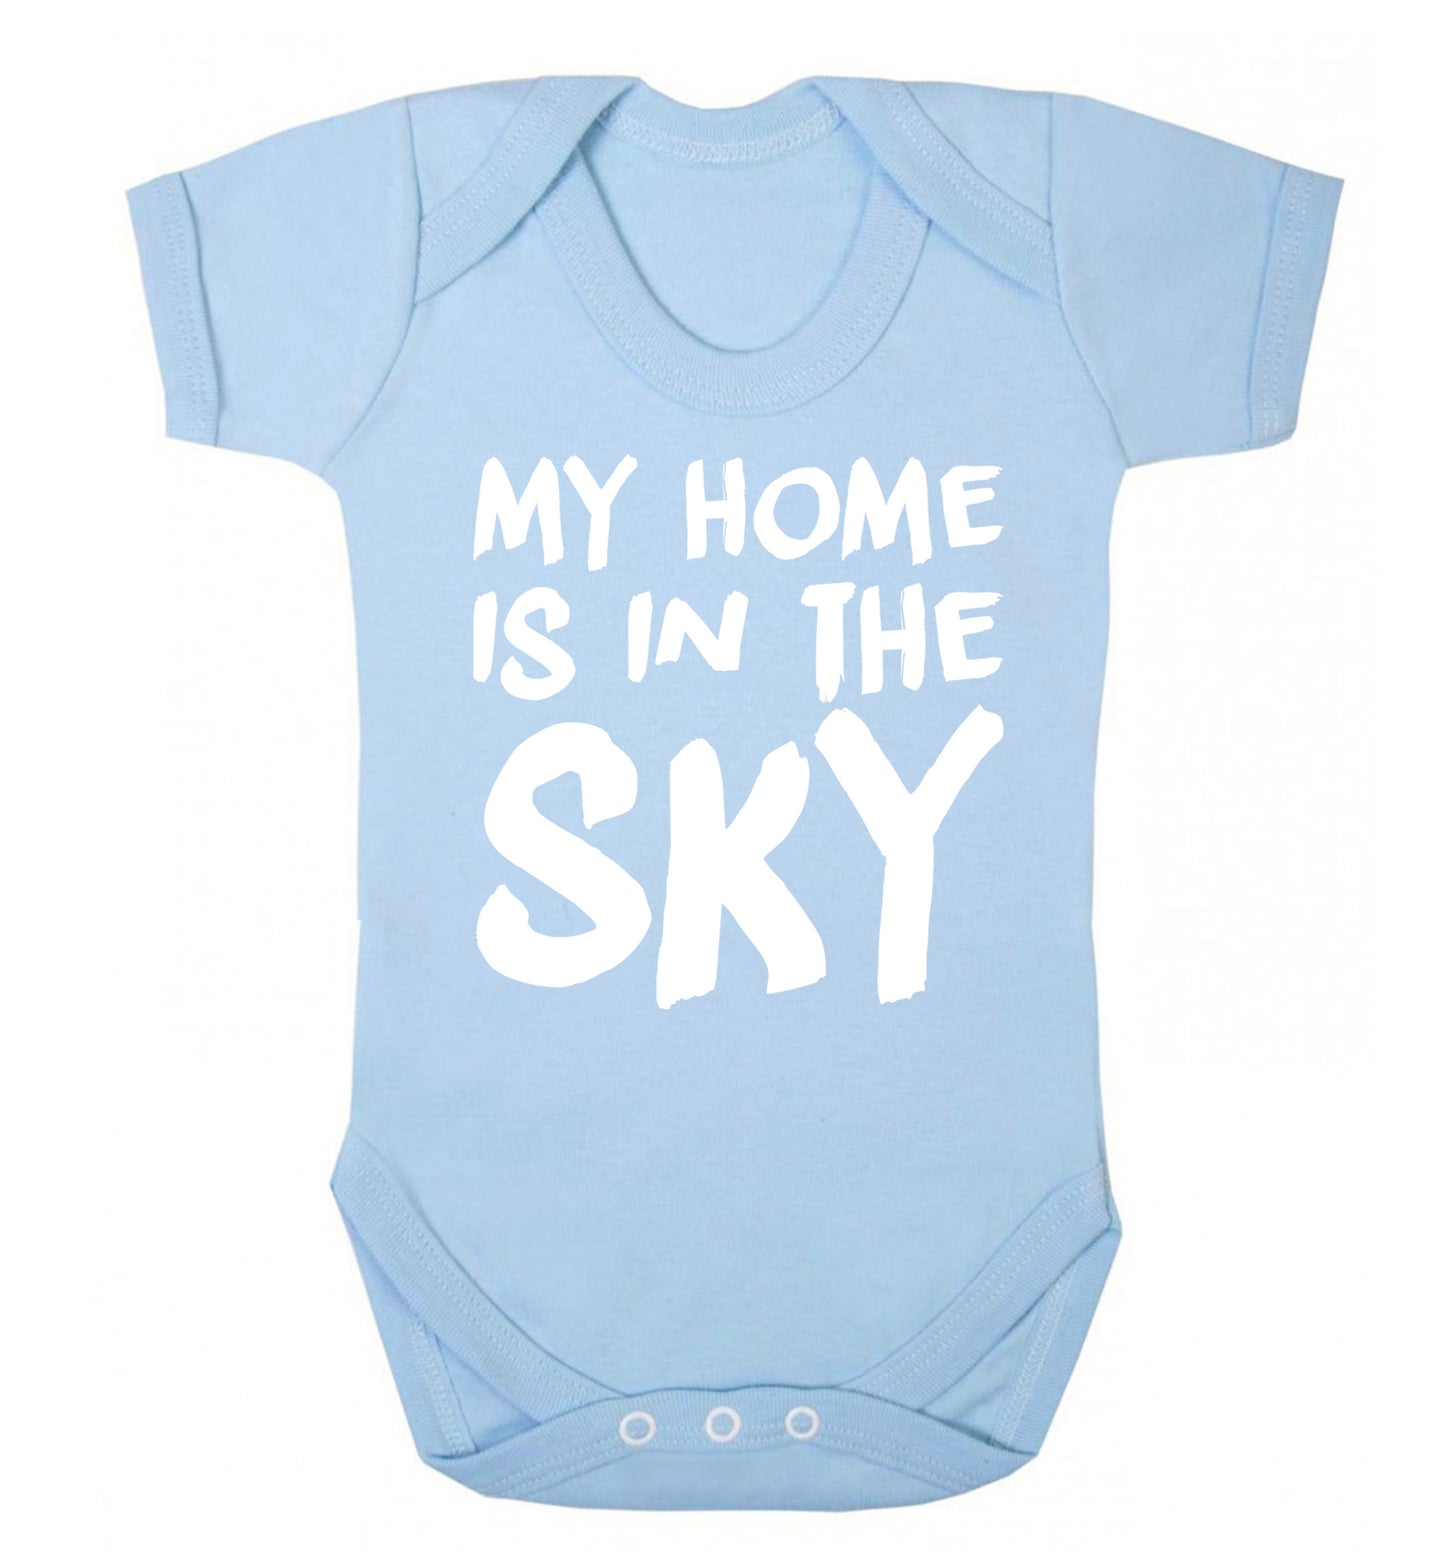 My home is in the sky Baby Vest pale blue 18-24 months